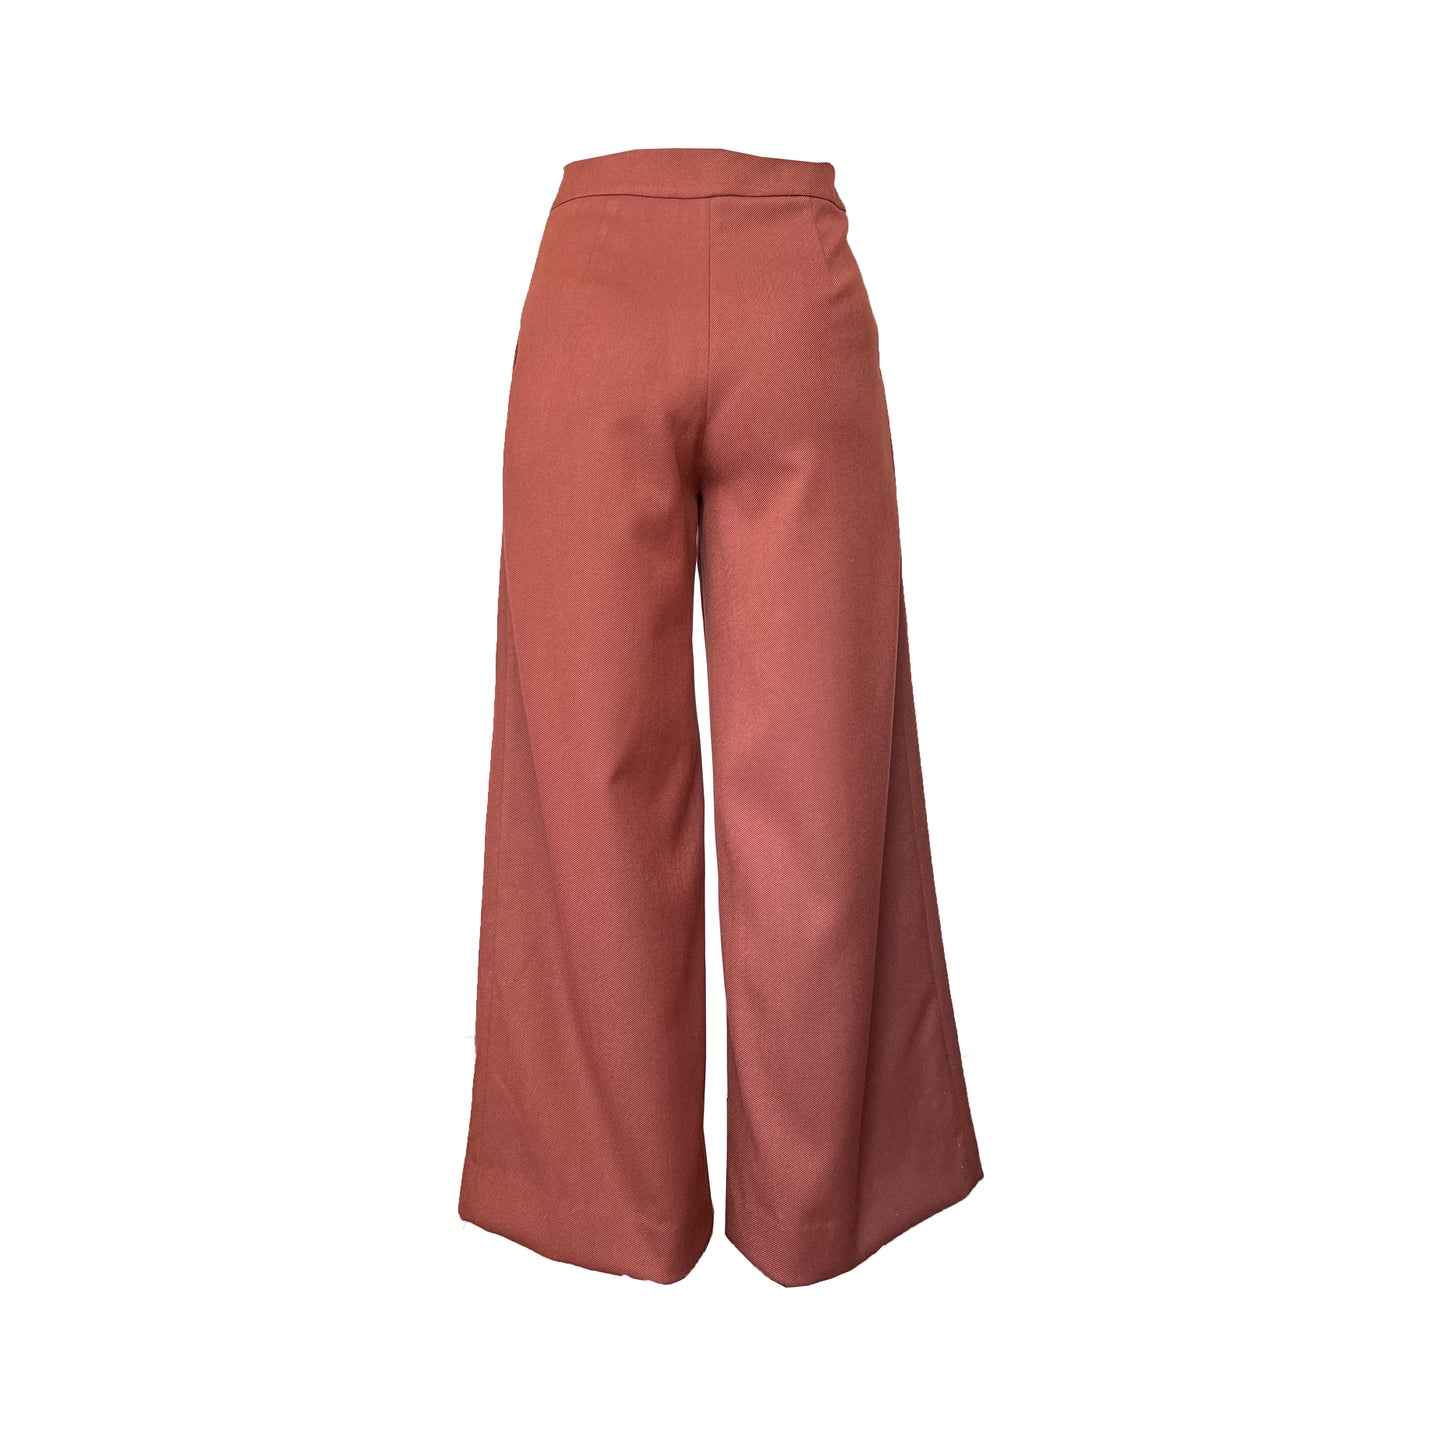 Back of wool blend high waisted flared pants, made in solid fabric in rust red